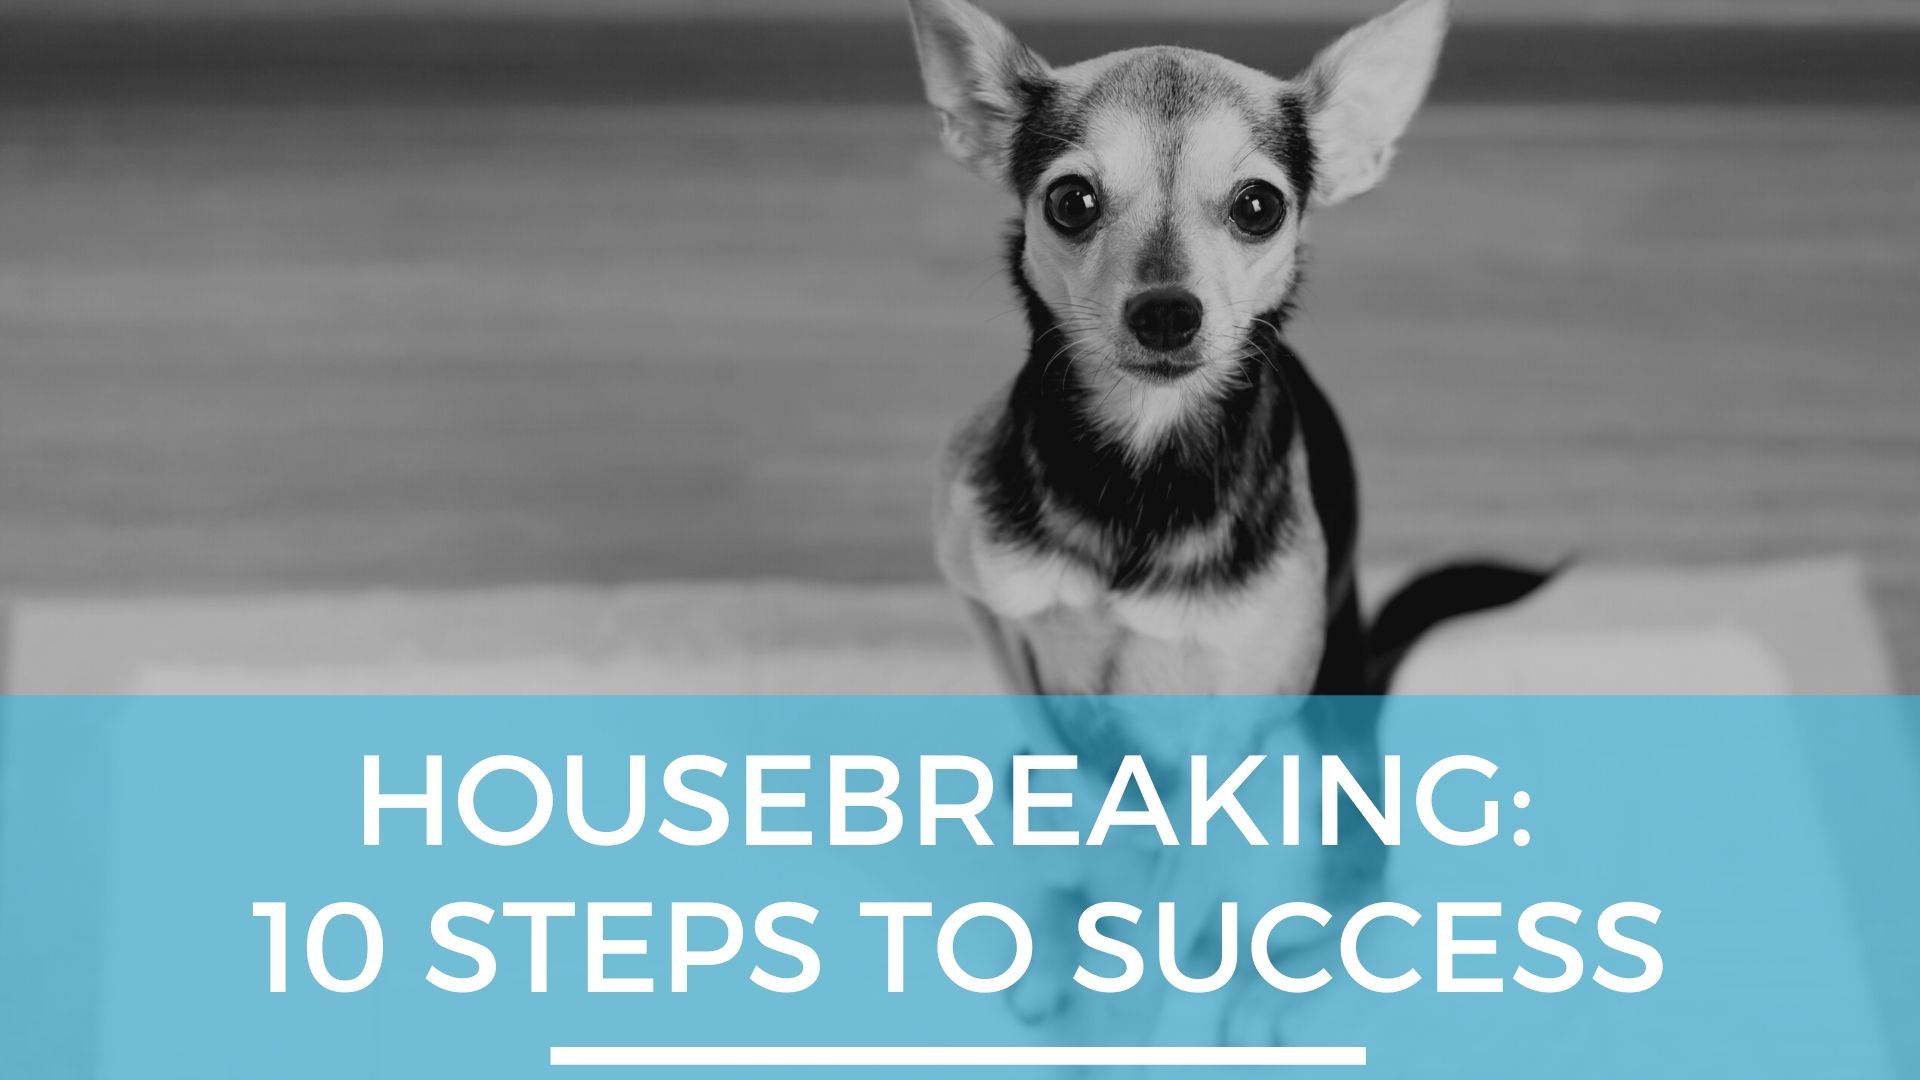 How to Housebreak Your Puppy in 5 Steps